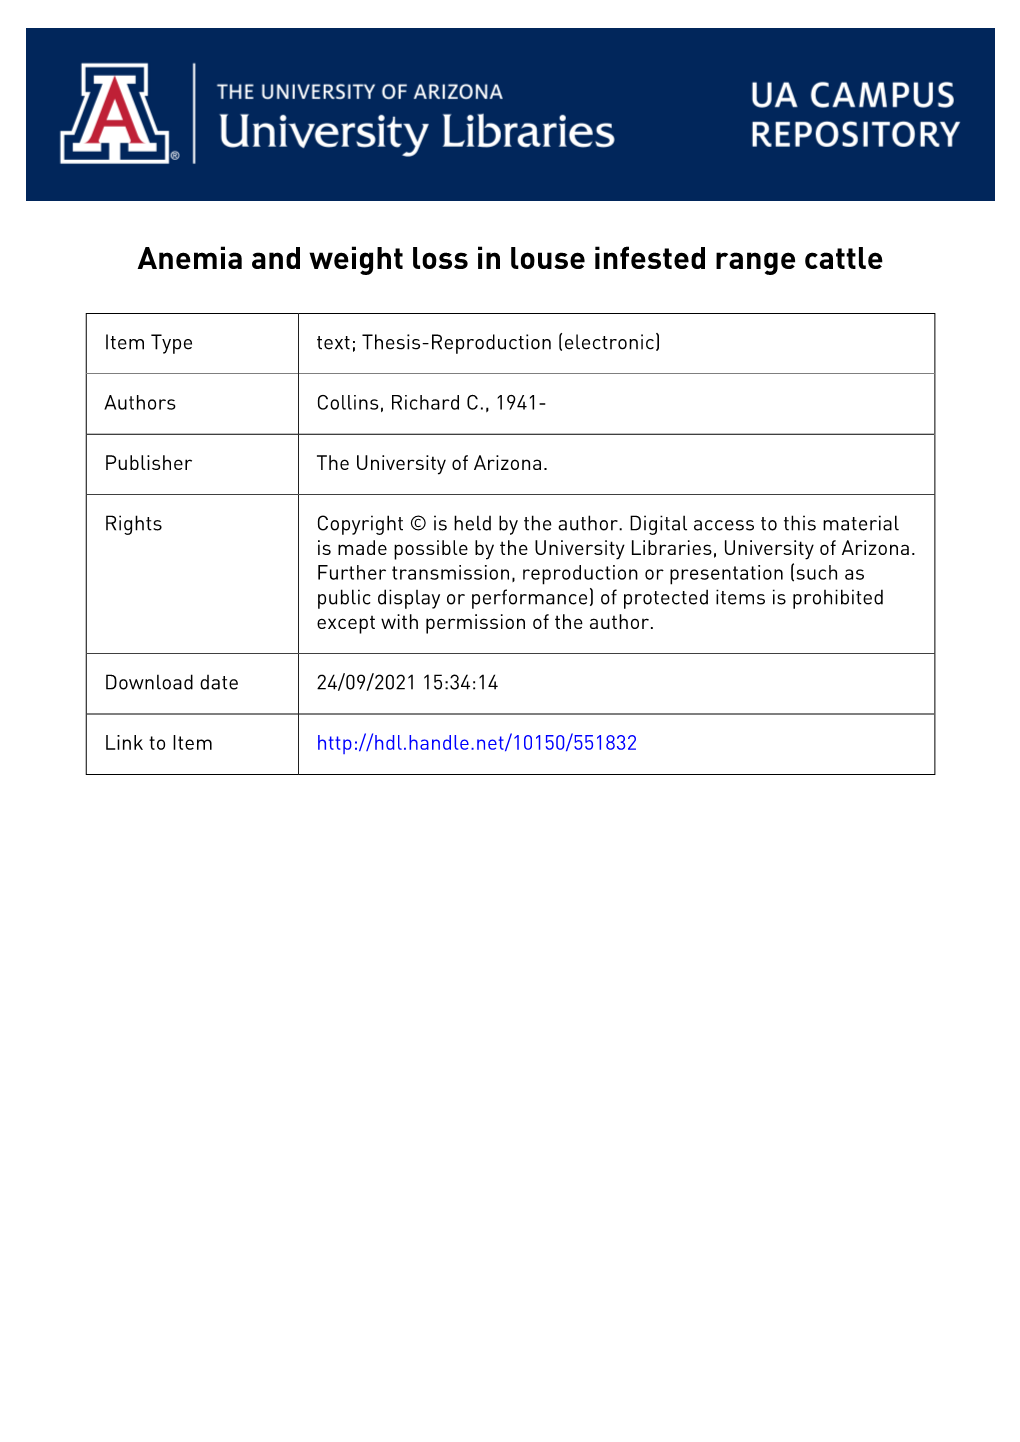 Anemia and Weight Loss in Louse Infested Range Cattle